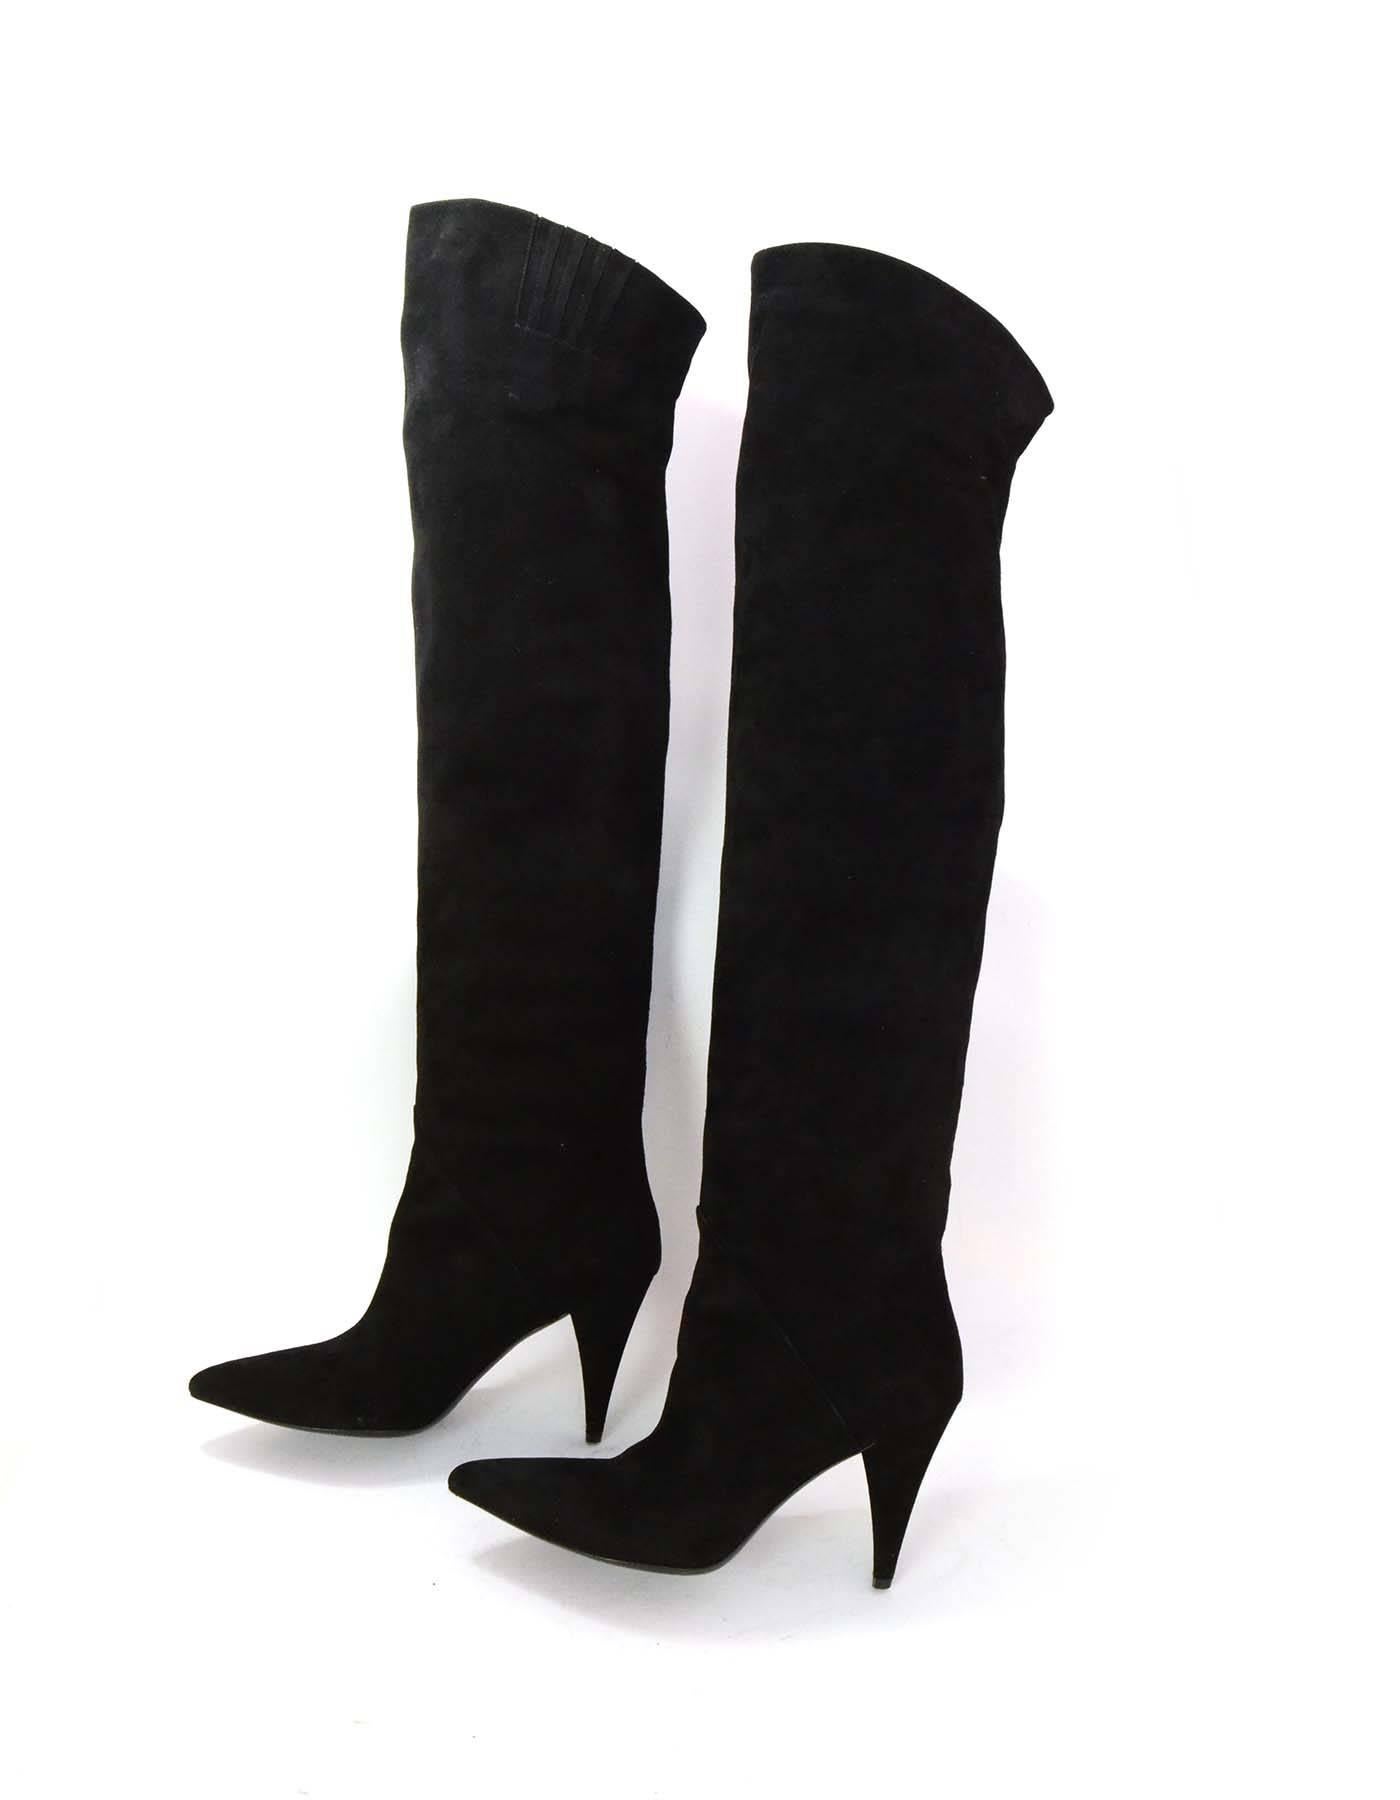 Saint Laurent Black Suede Cat Thigh High Boots sz 39
Features a pointed toe 
Made In: Italy
Color: Black 
Materials: Suede 
Closure/Opening: Slip on
Sole Stamp: Saint Laurent Paris Made in Italy 39
Retail Price: $1,495 + tax
Overall